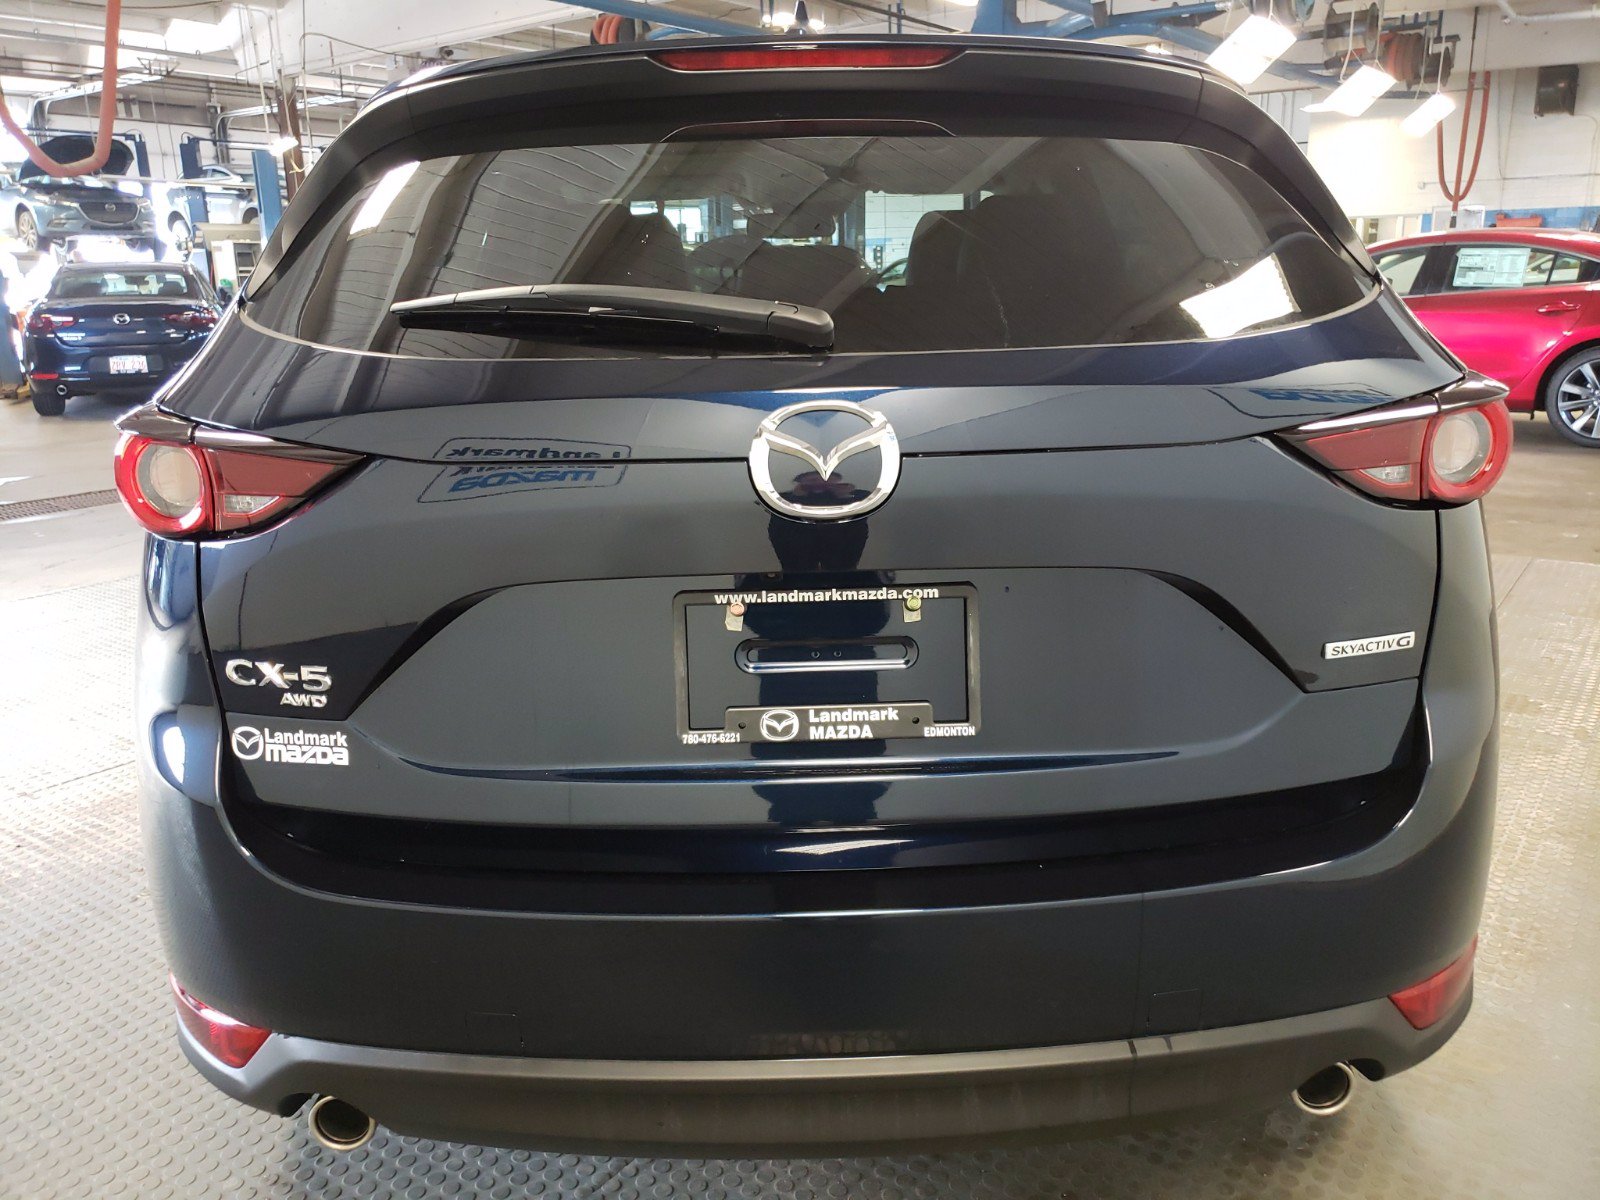 New 2020 Mazda CX5 GS w/ Comfort Package Sport Utility in